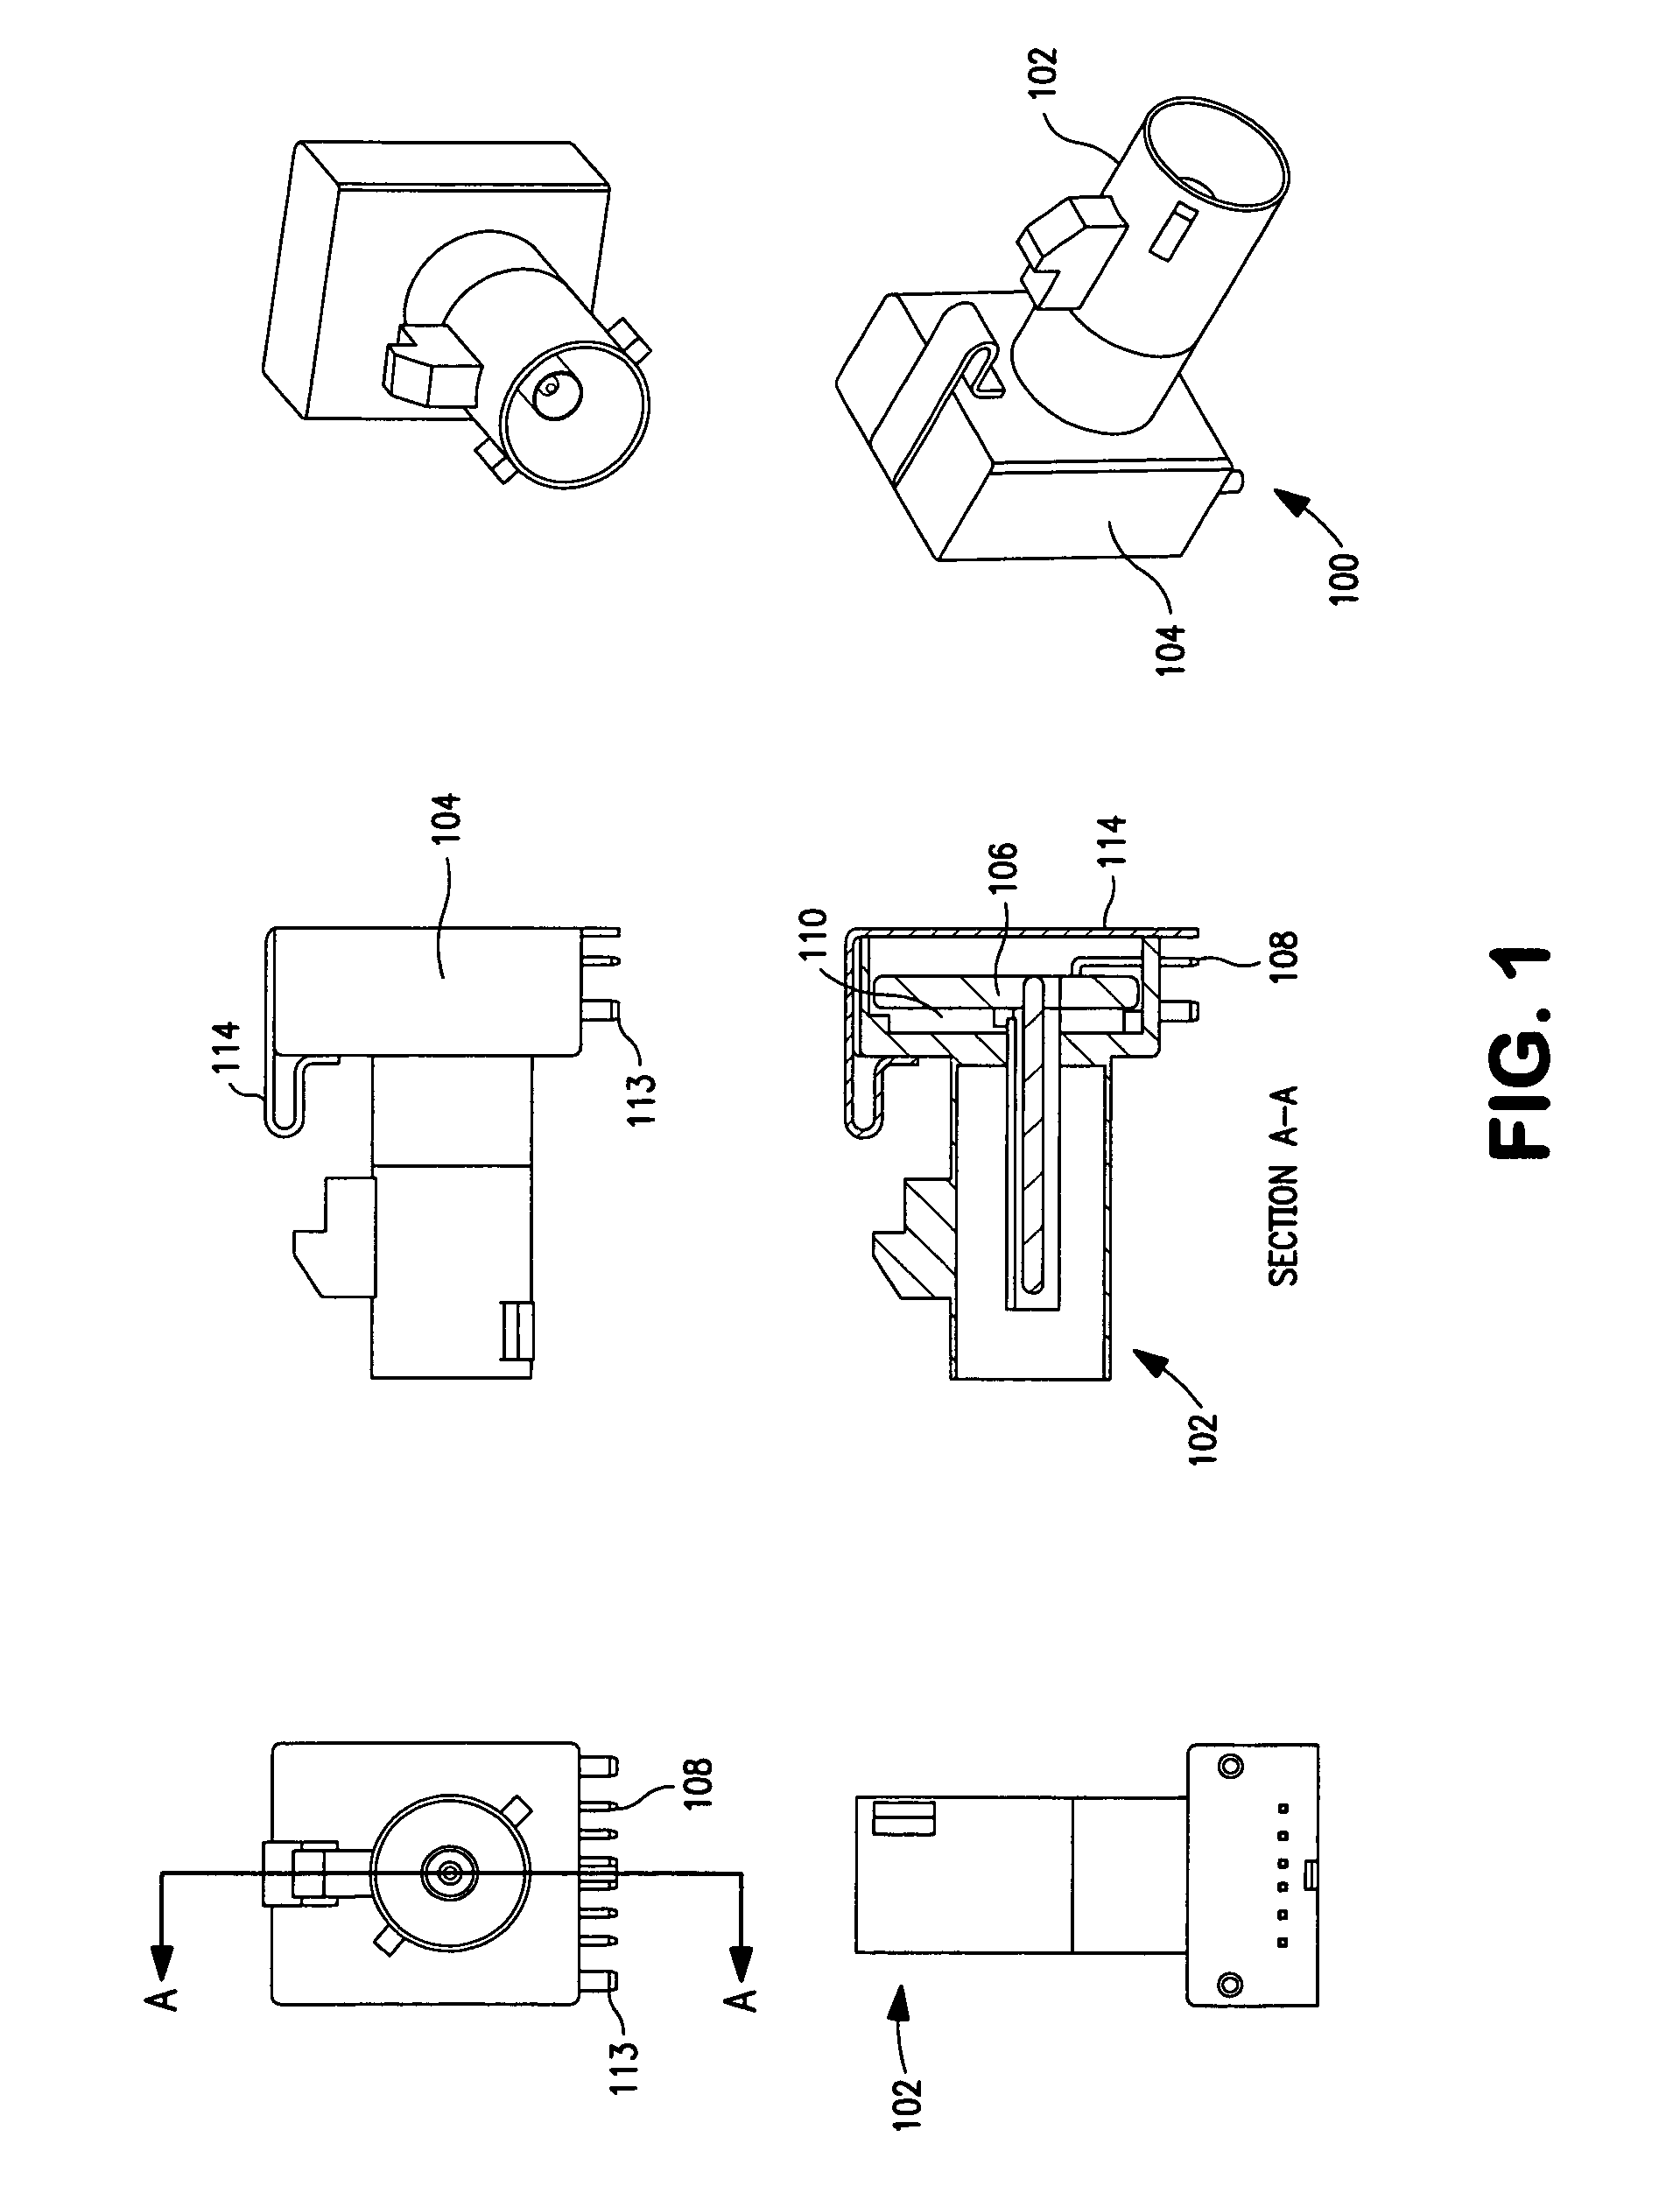 Low-cost connector apparatus and methods for use in high-speed data applications